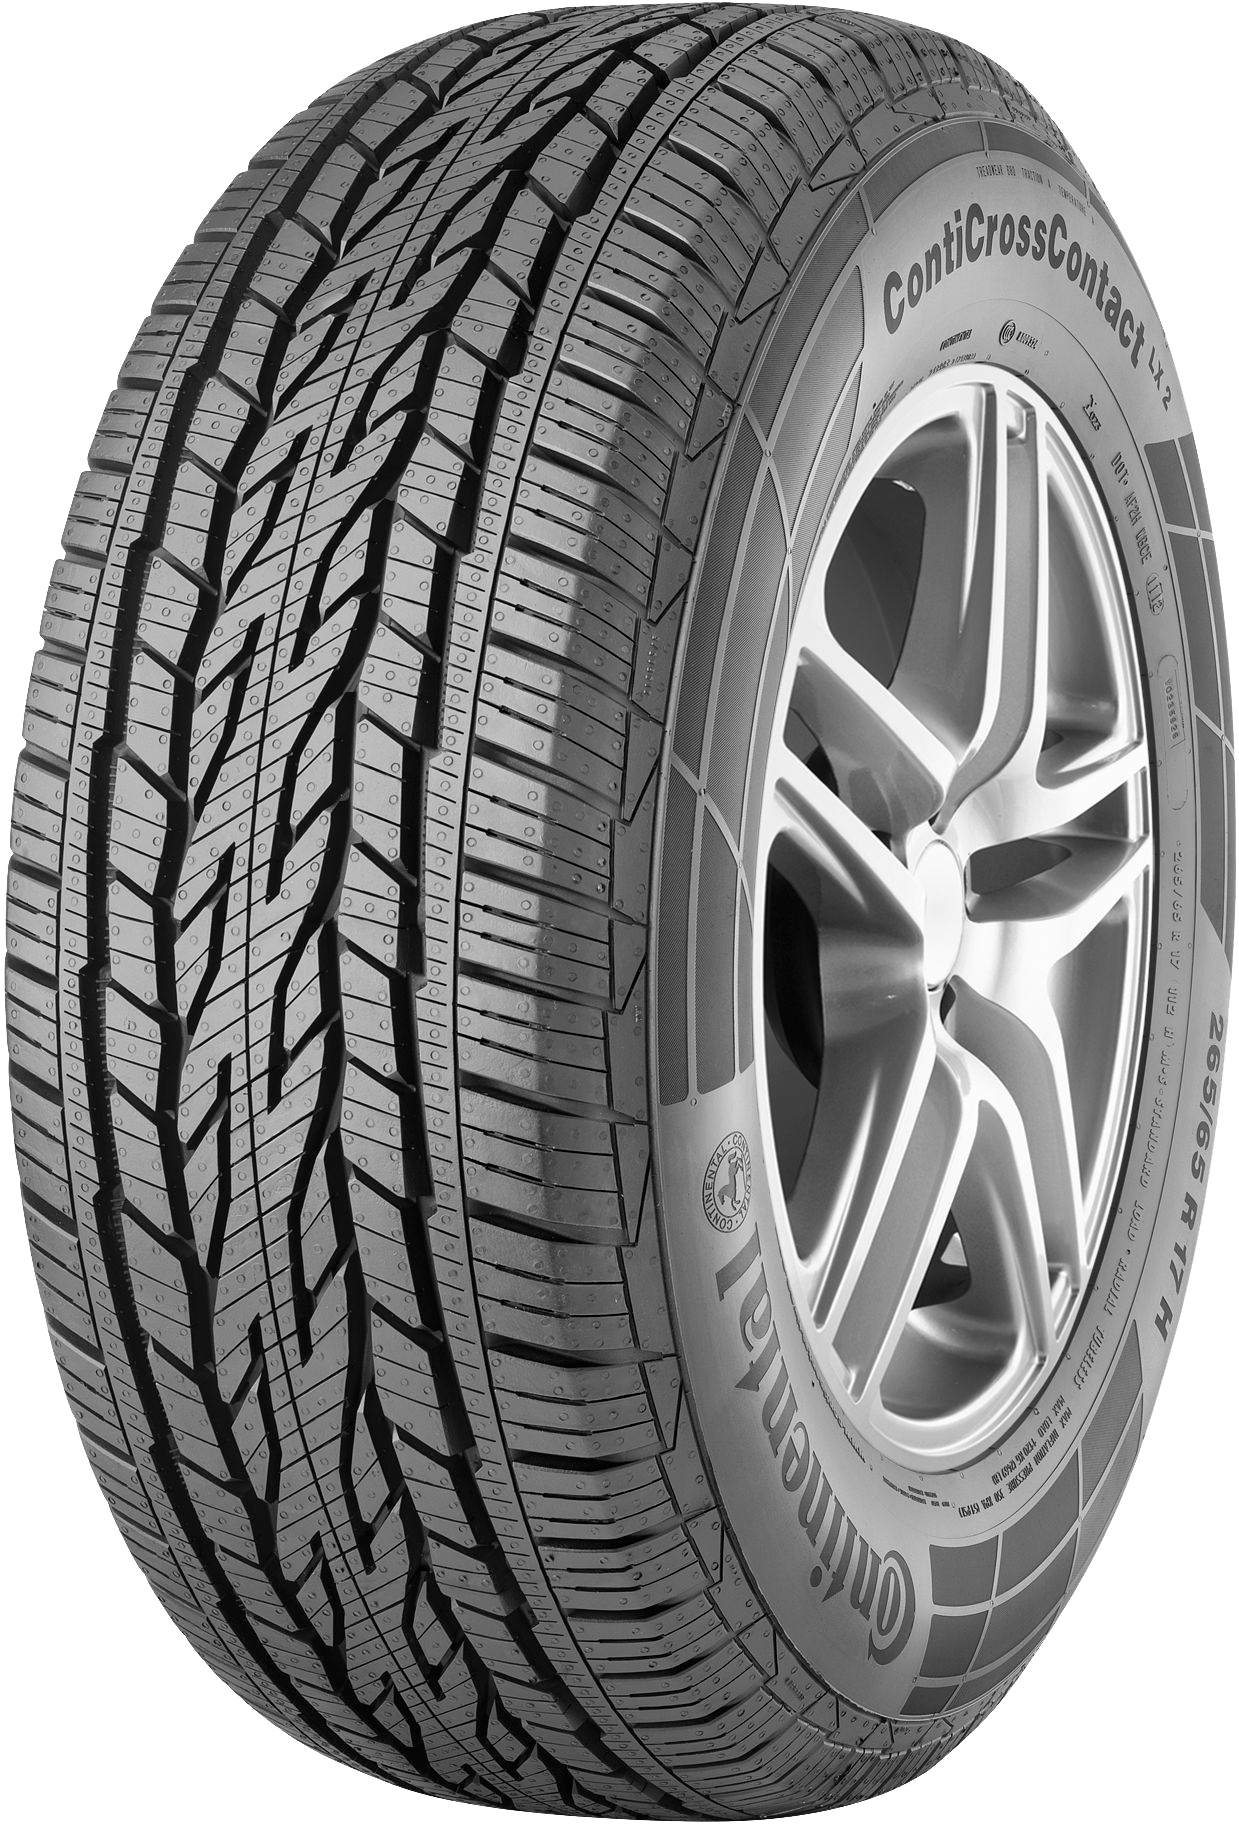 CONTINENTAL ContiCrossContact LX2 225/70 R15 0